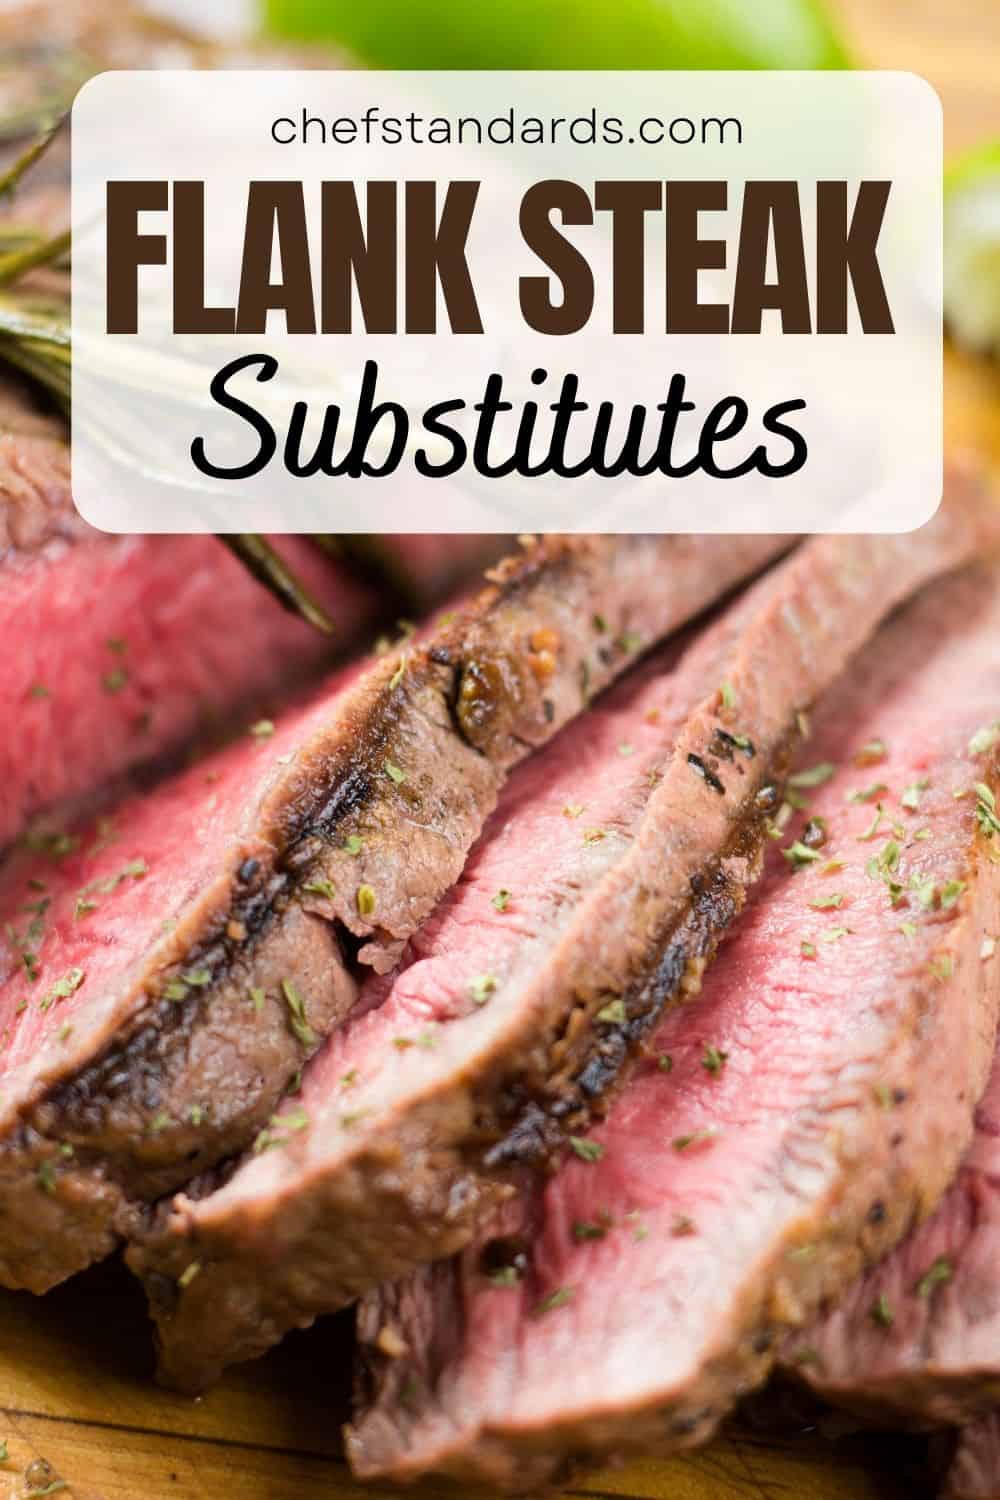 16 Mouth-Watering Substitutes for Flank Steak To Enjoy
